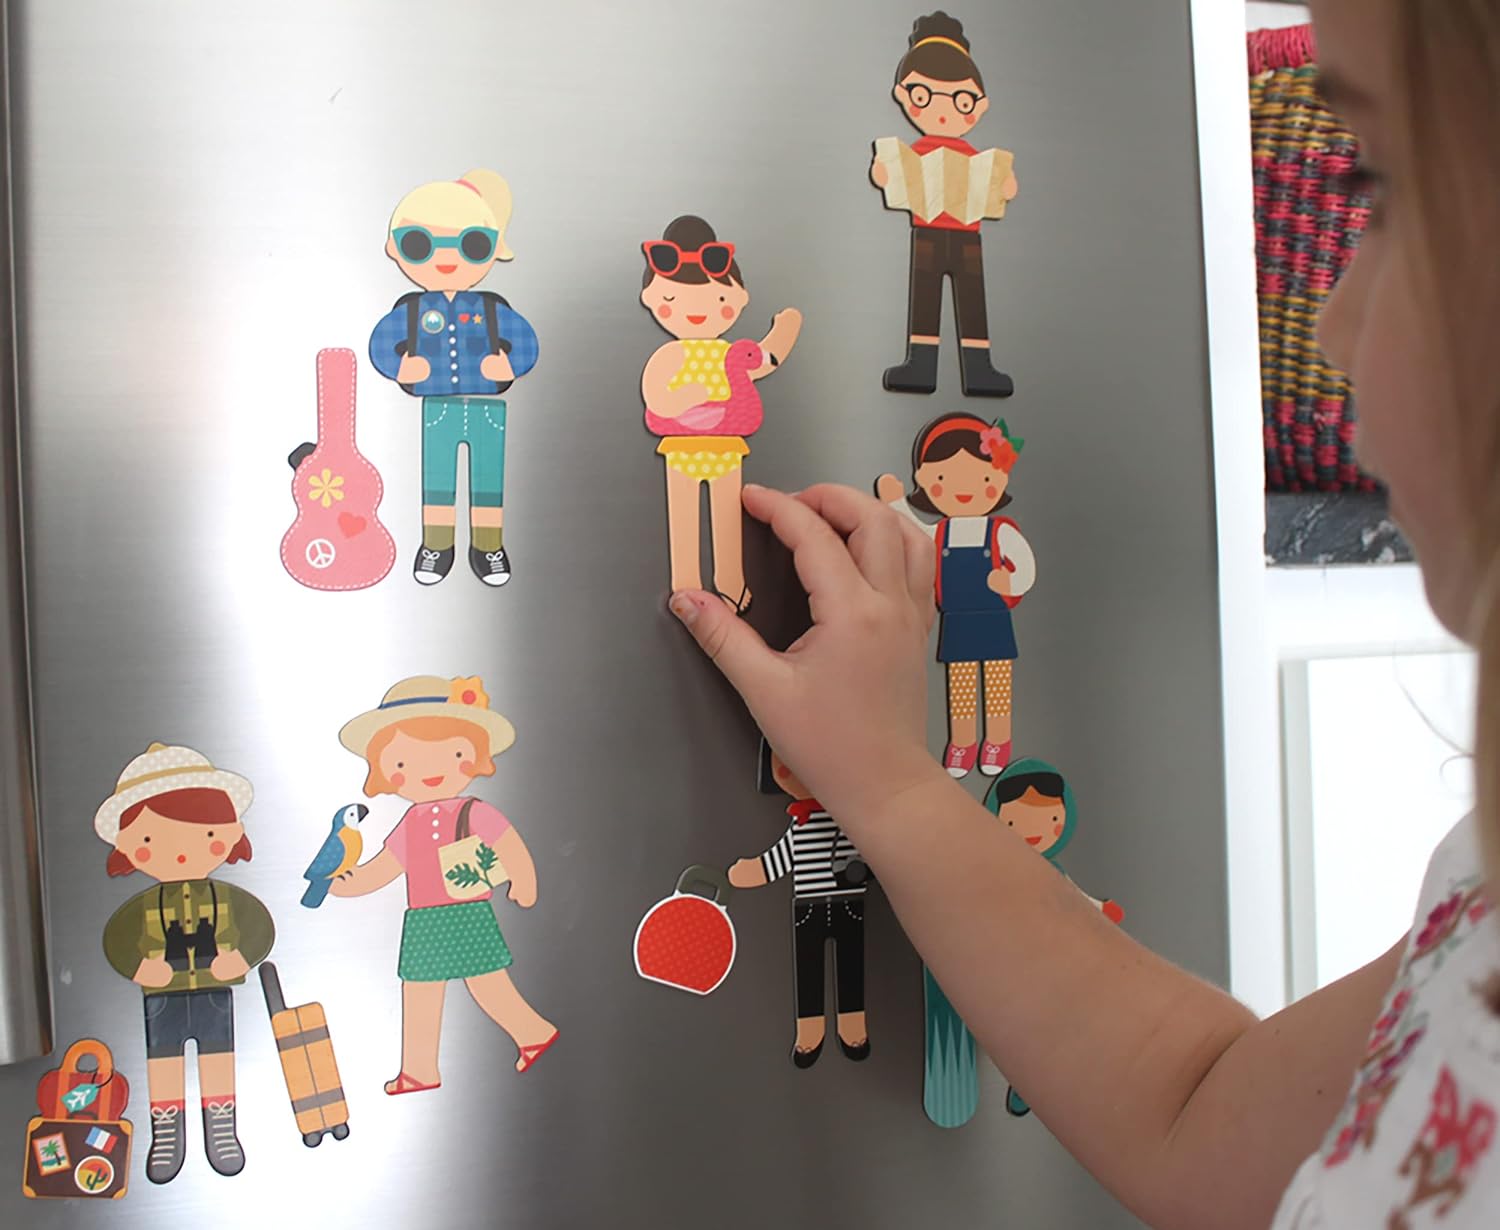 Petit Collage On-the-Go Magnetic Play Set: Little Travelers